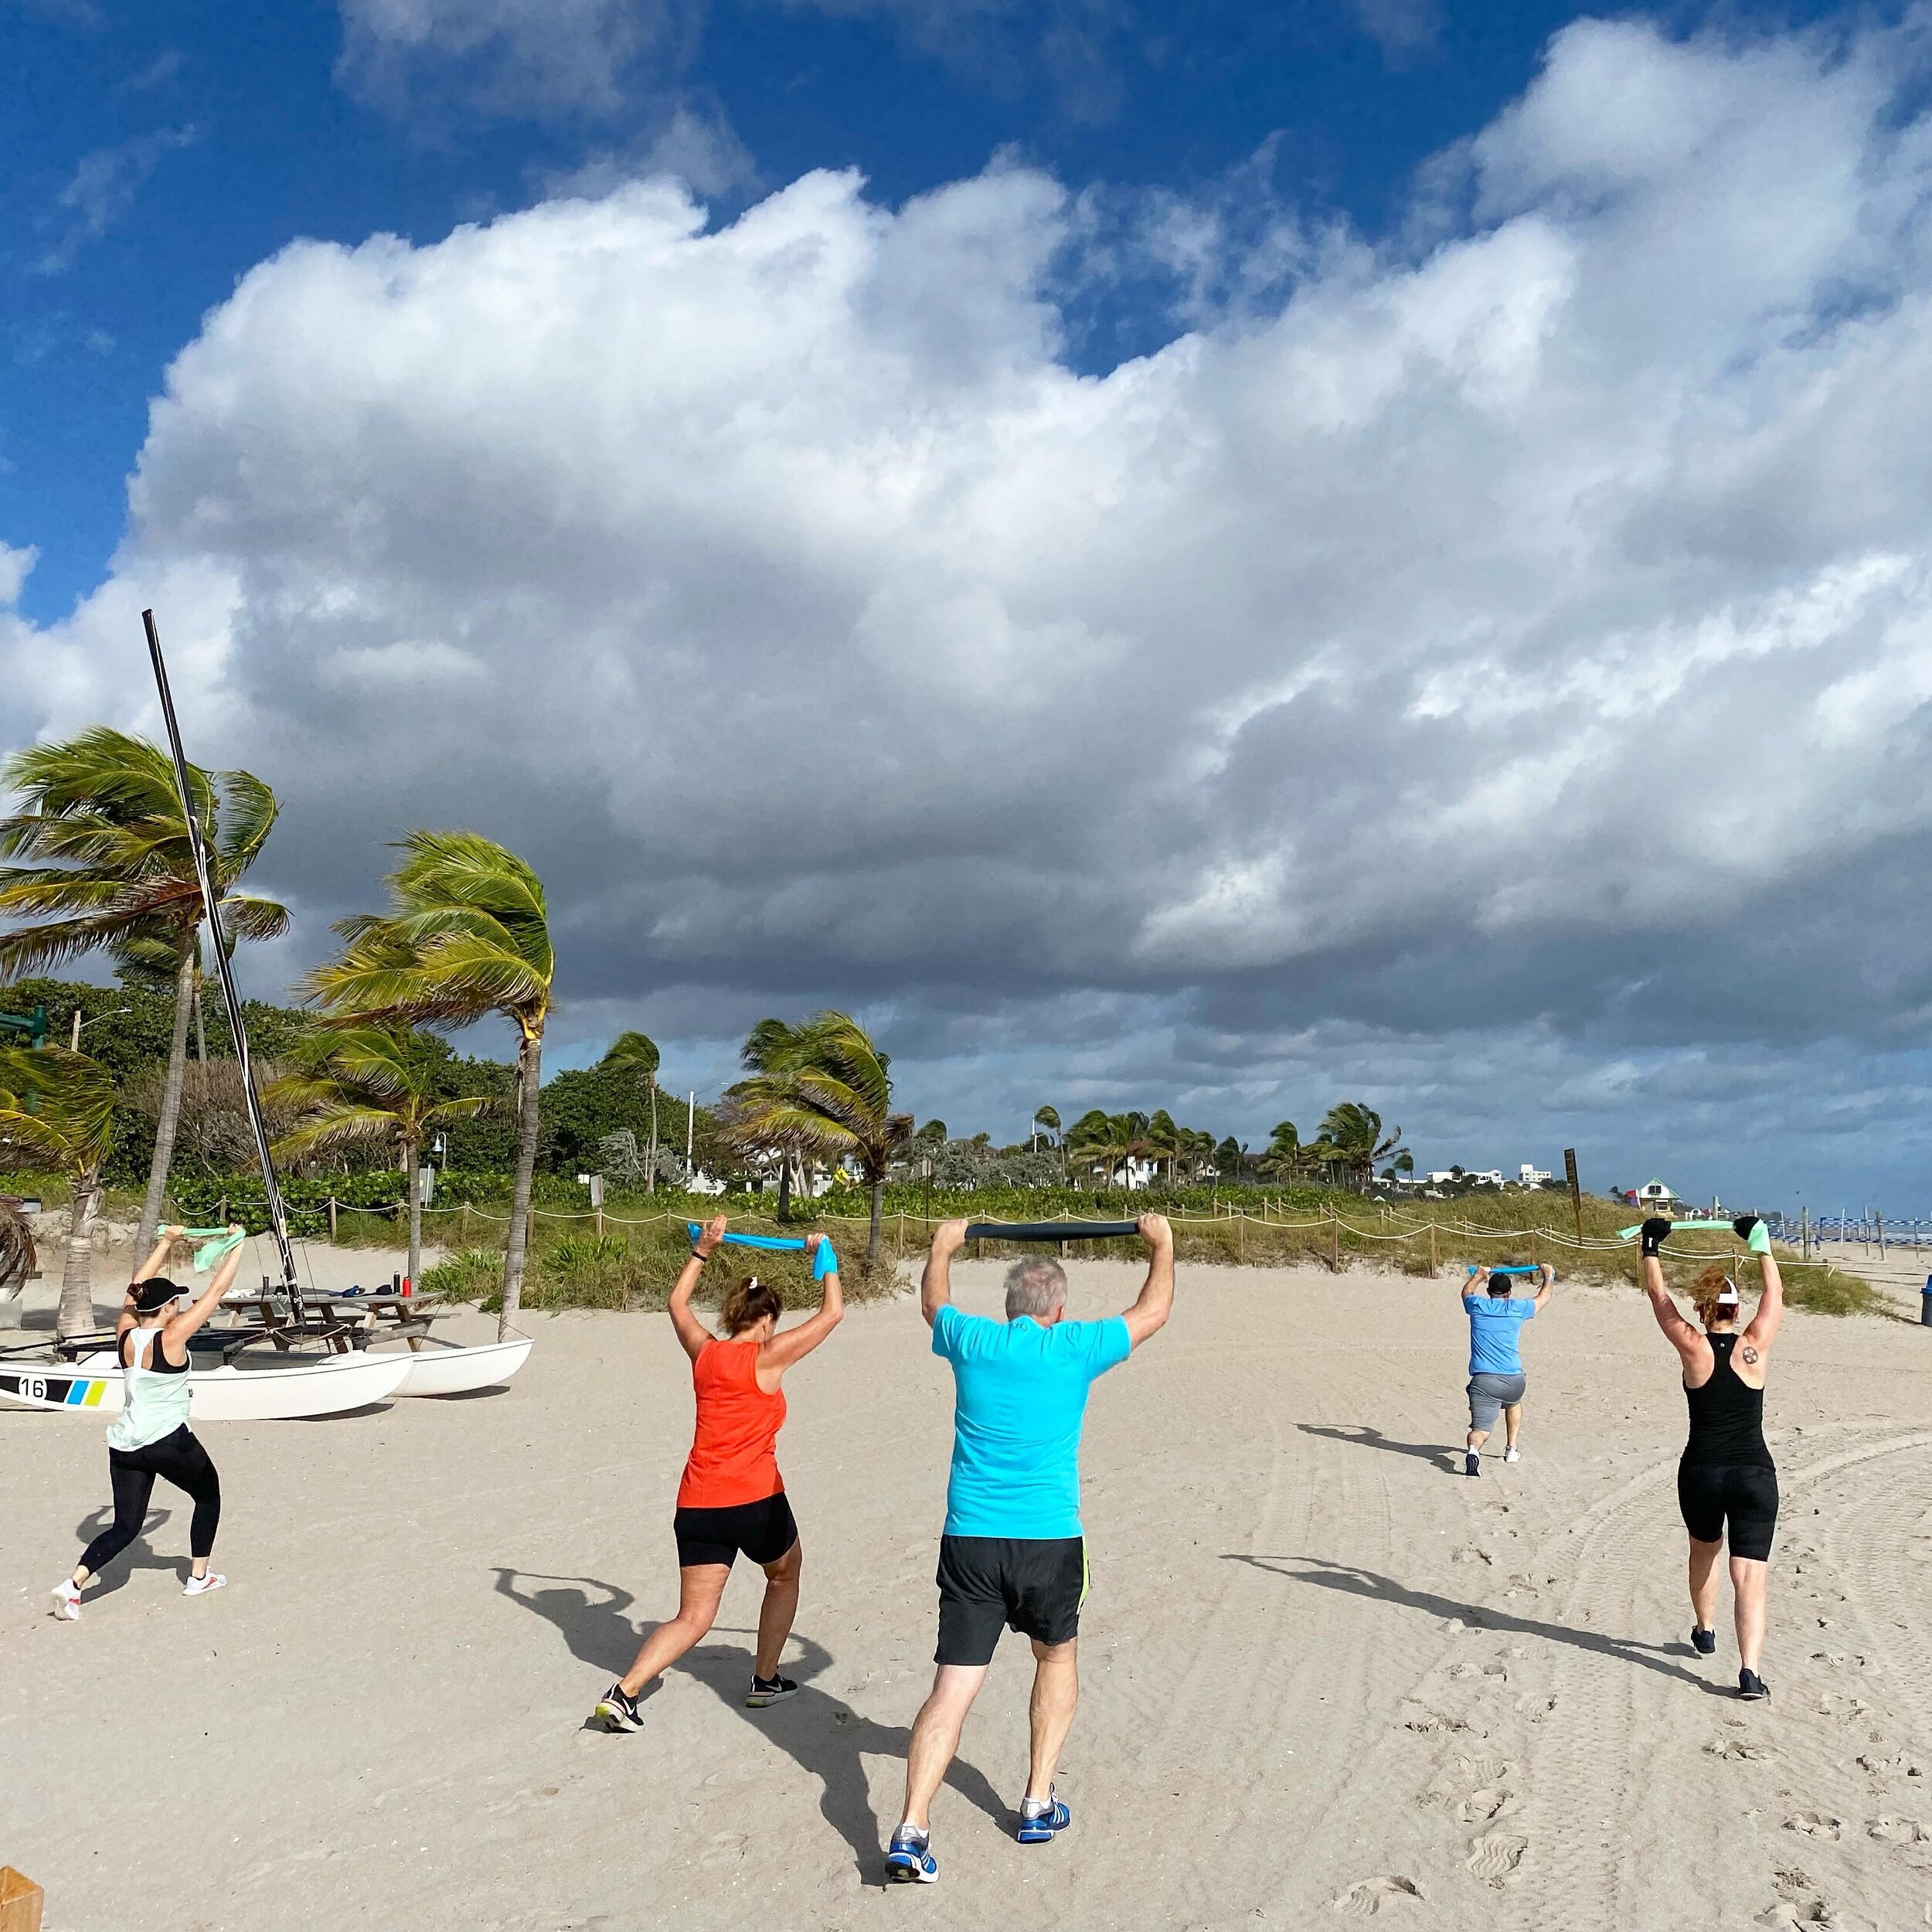 Lunging our way into Saturday on this beautiful morning at the beach! 💪🌴 We&rsquo;re embracing the balance between mind, body &amp; soul with the ocean waves as our backdrop as we begin the day of workouts at our fitness retreat. Where is your favo